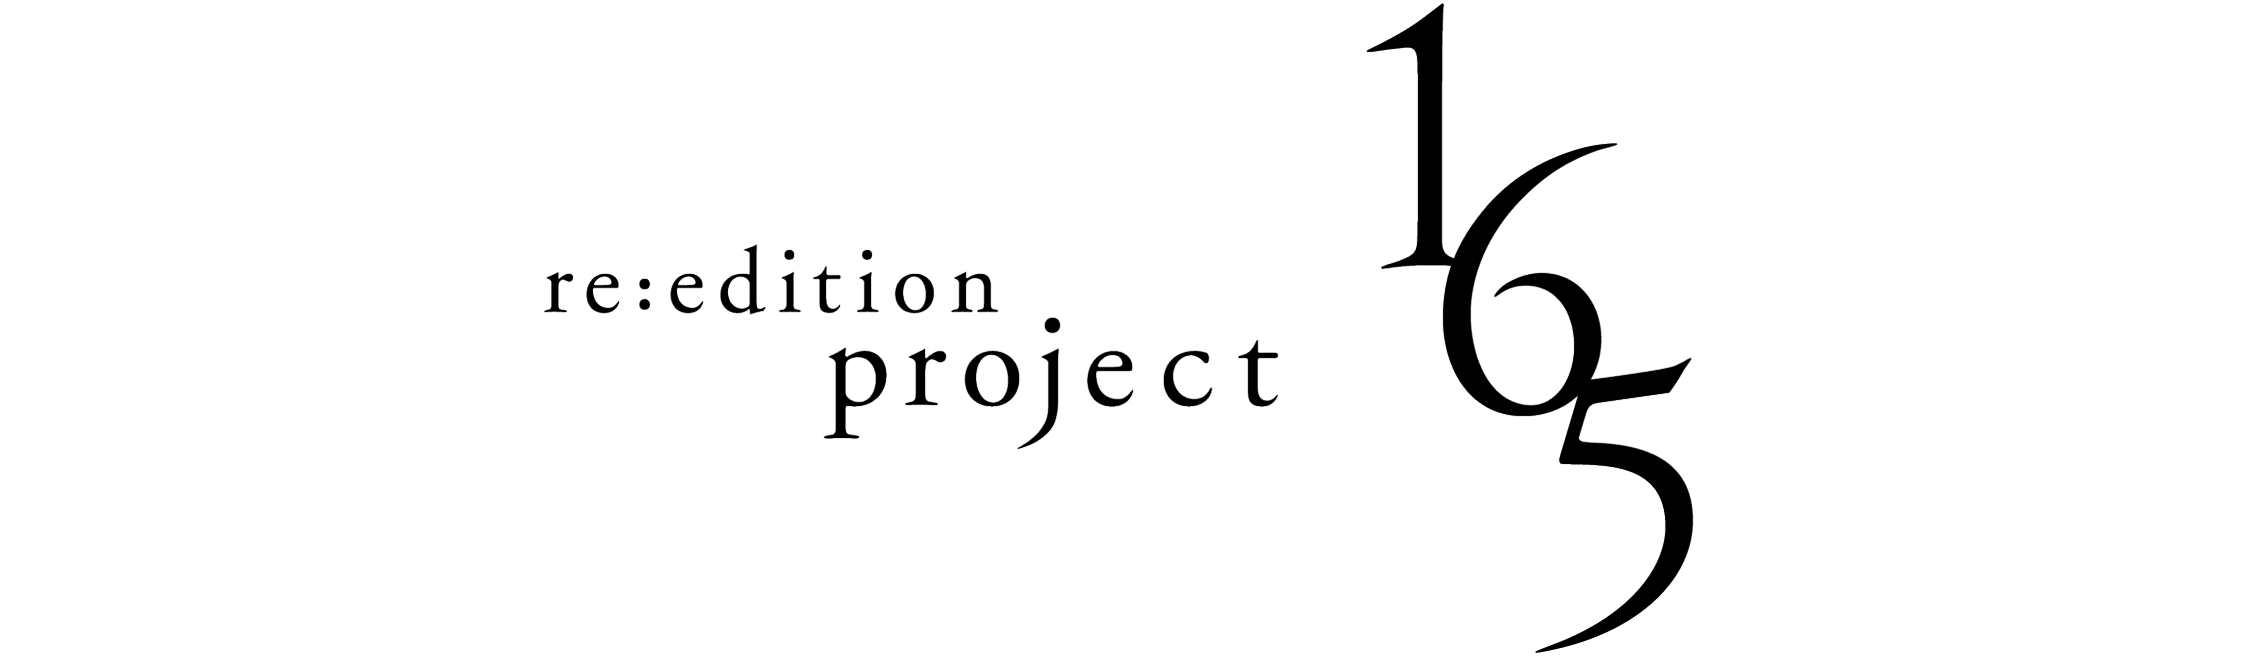 re:edition project 165